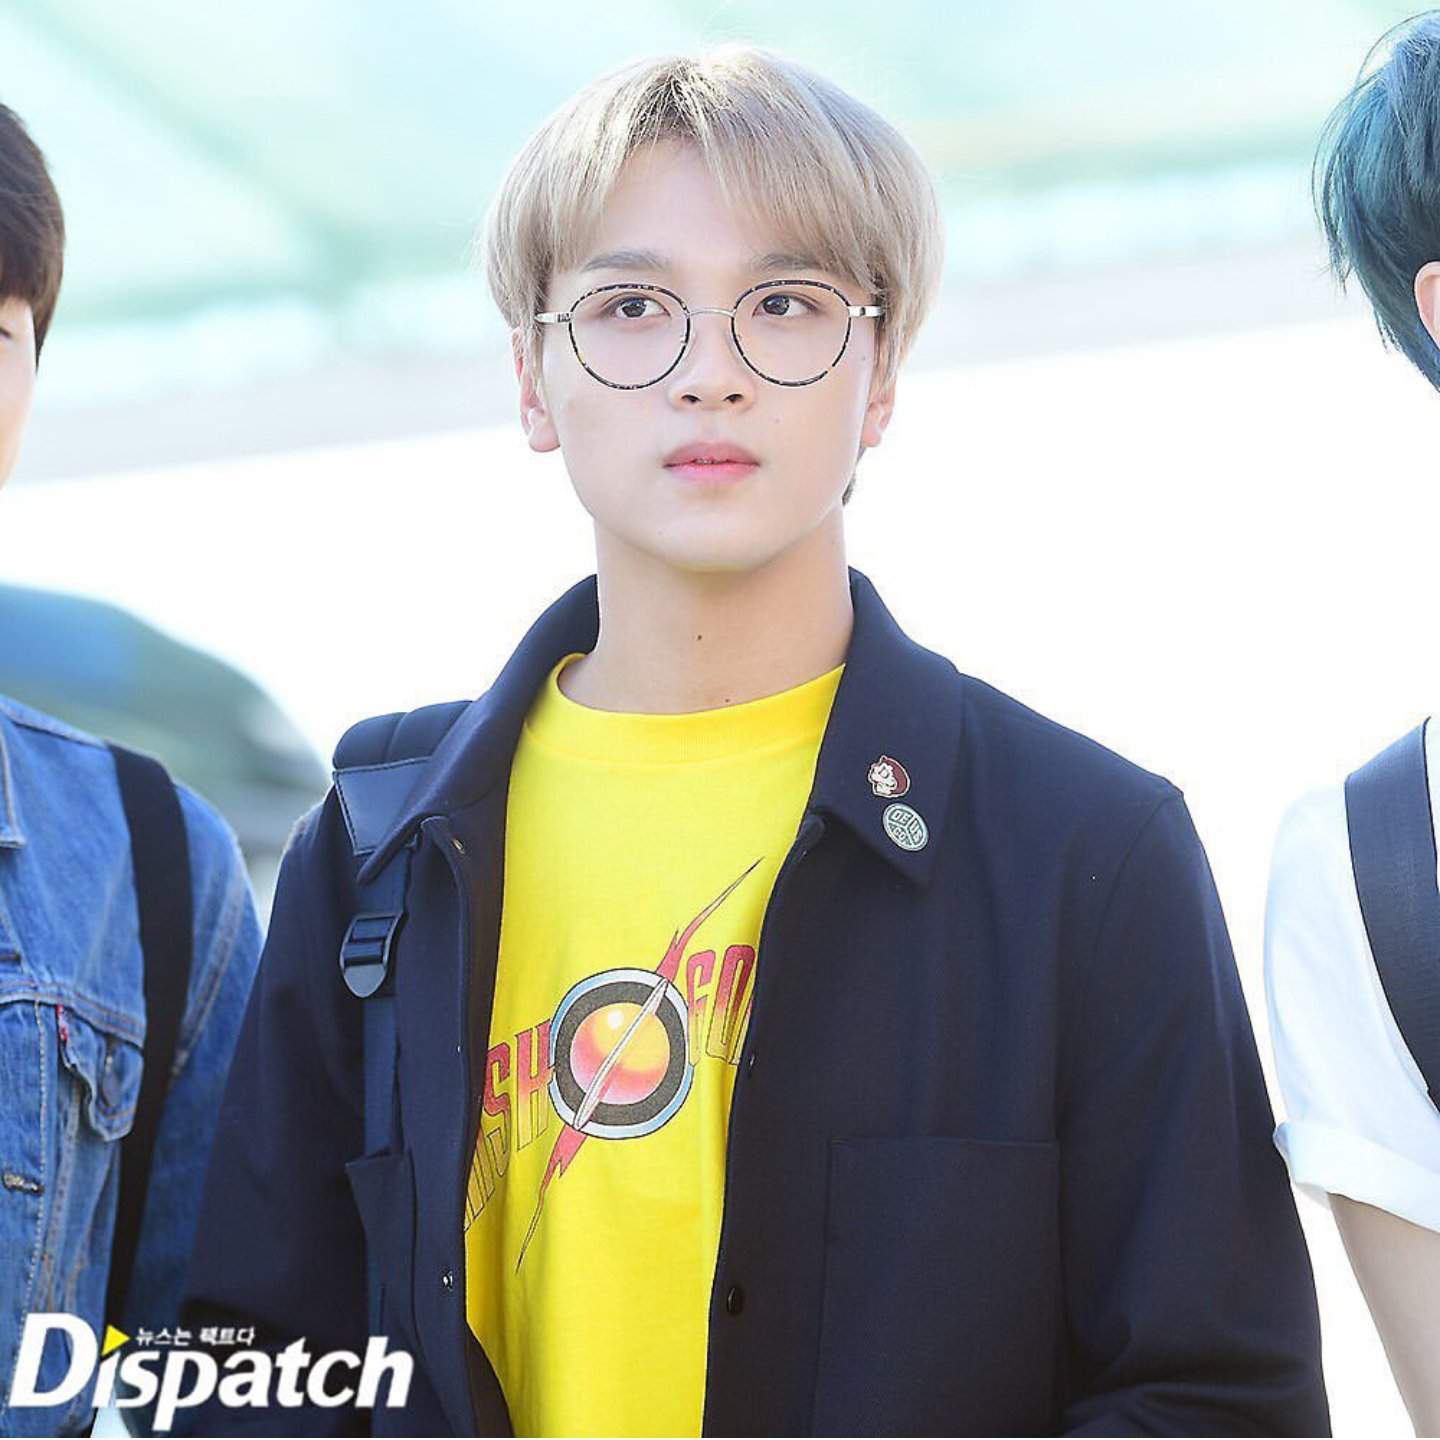 Donghyuck With Glasses And Faded Blonde Hair Breathe If You Agree